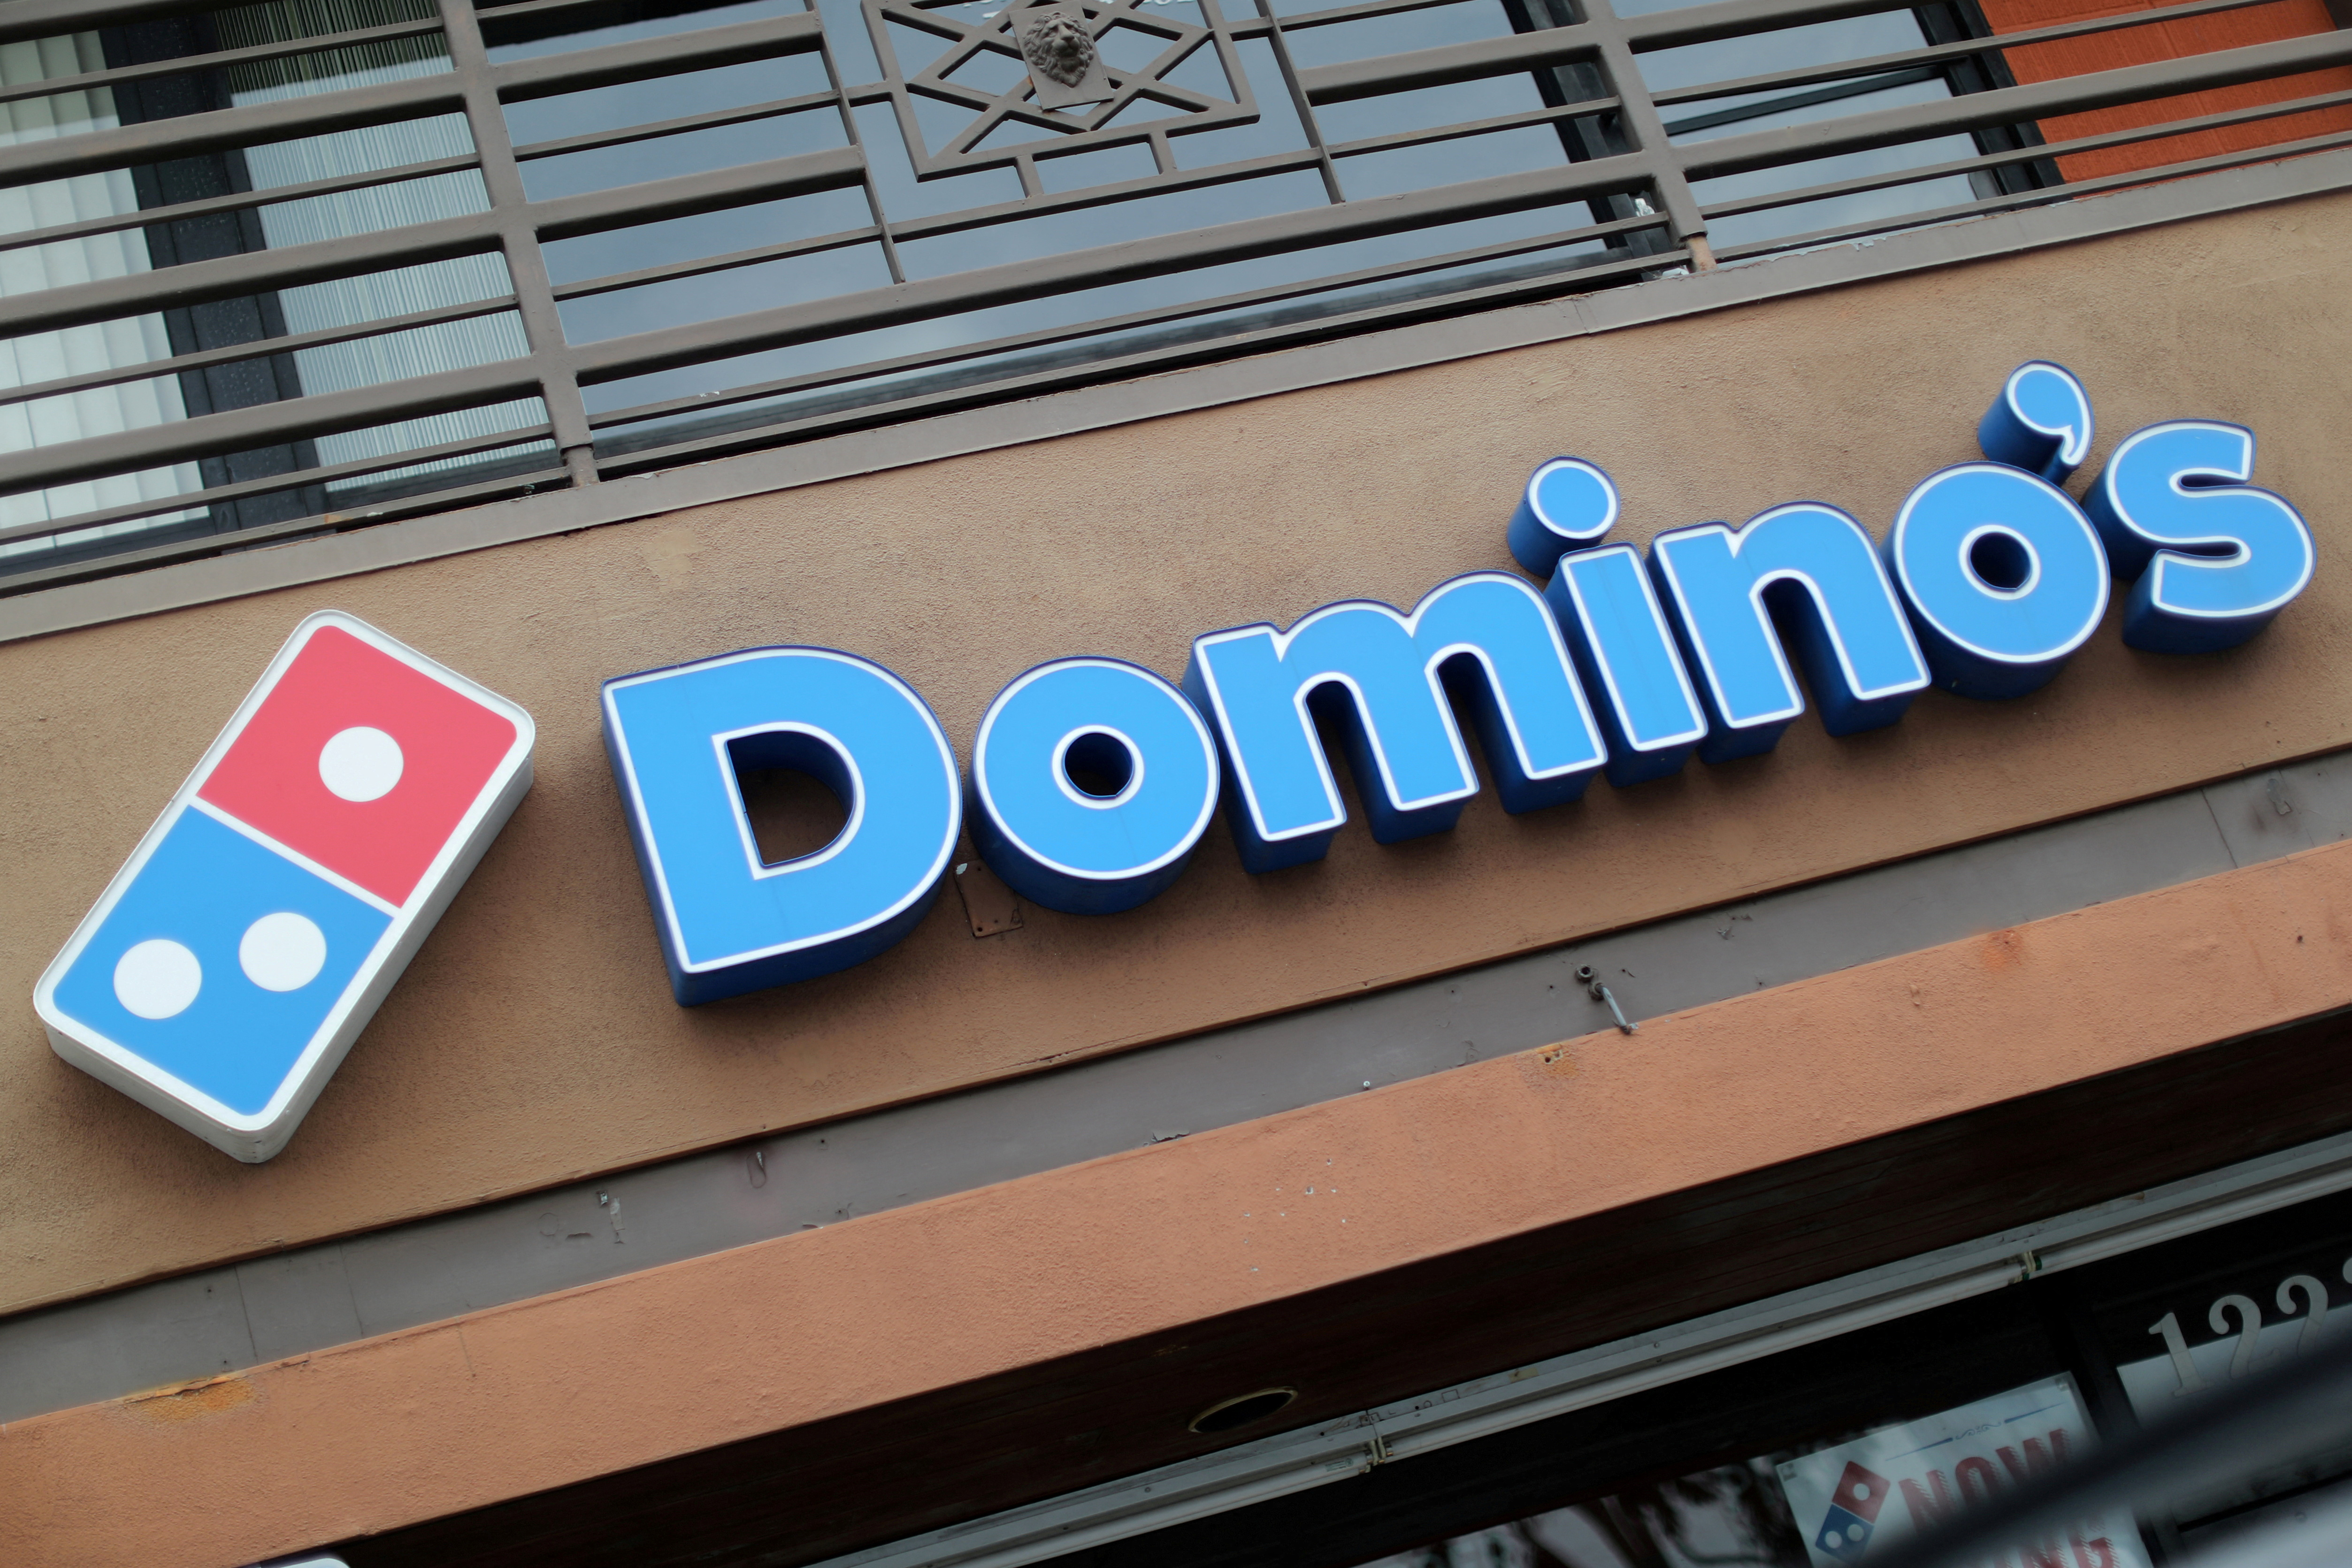 Domino's may soon bake your pizza during delivery